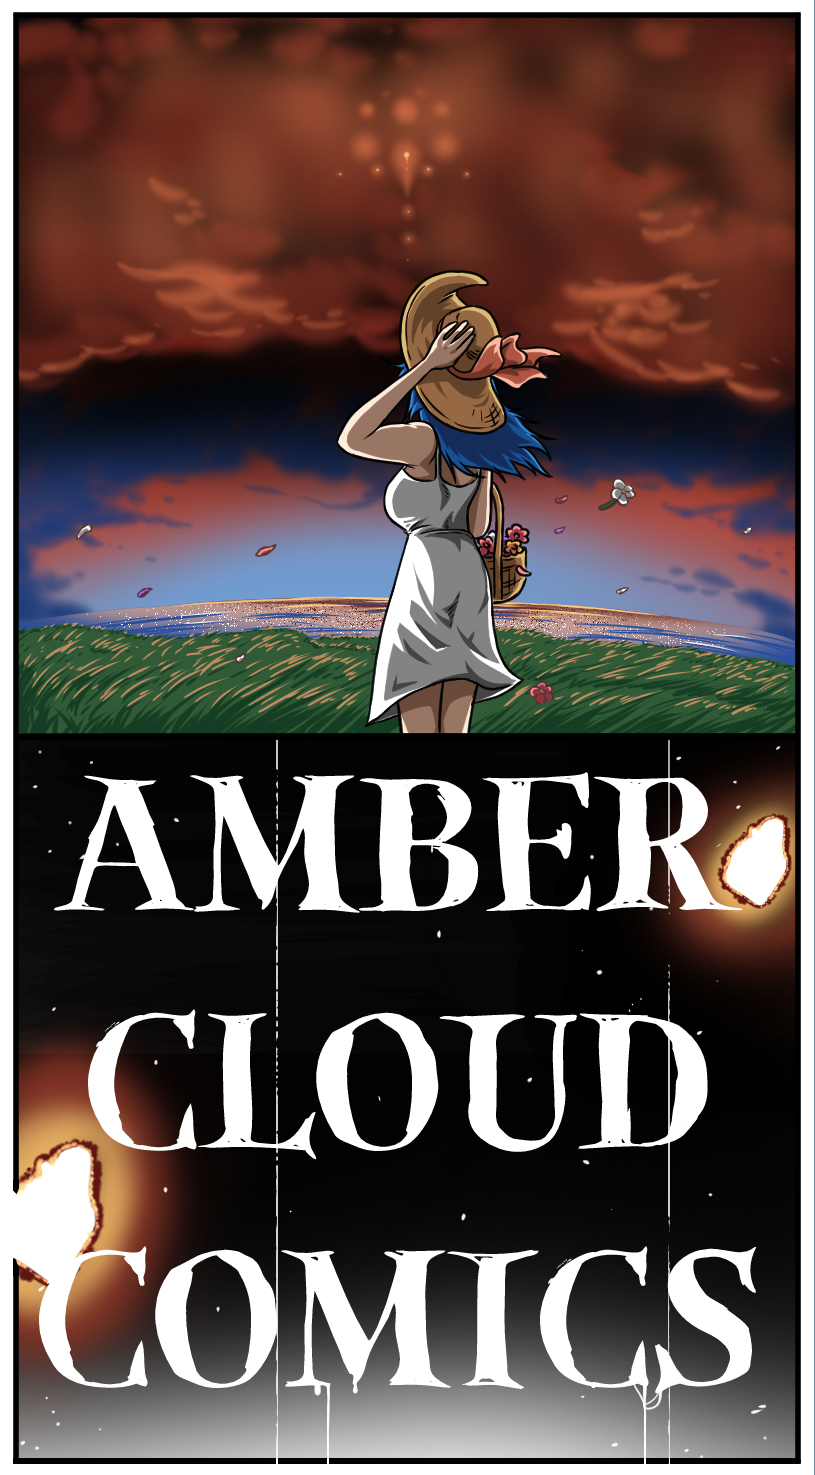 The Amber Cloud